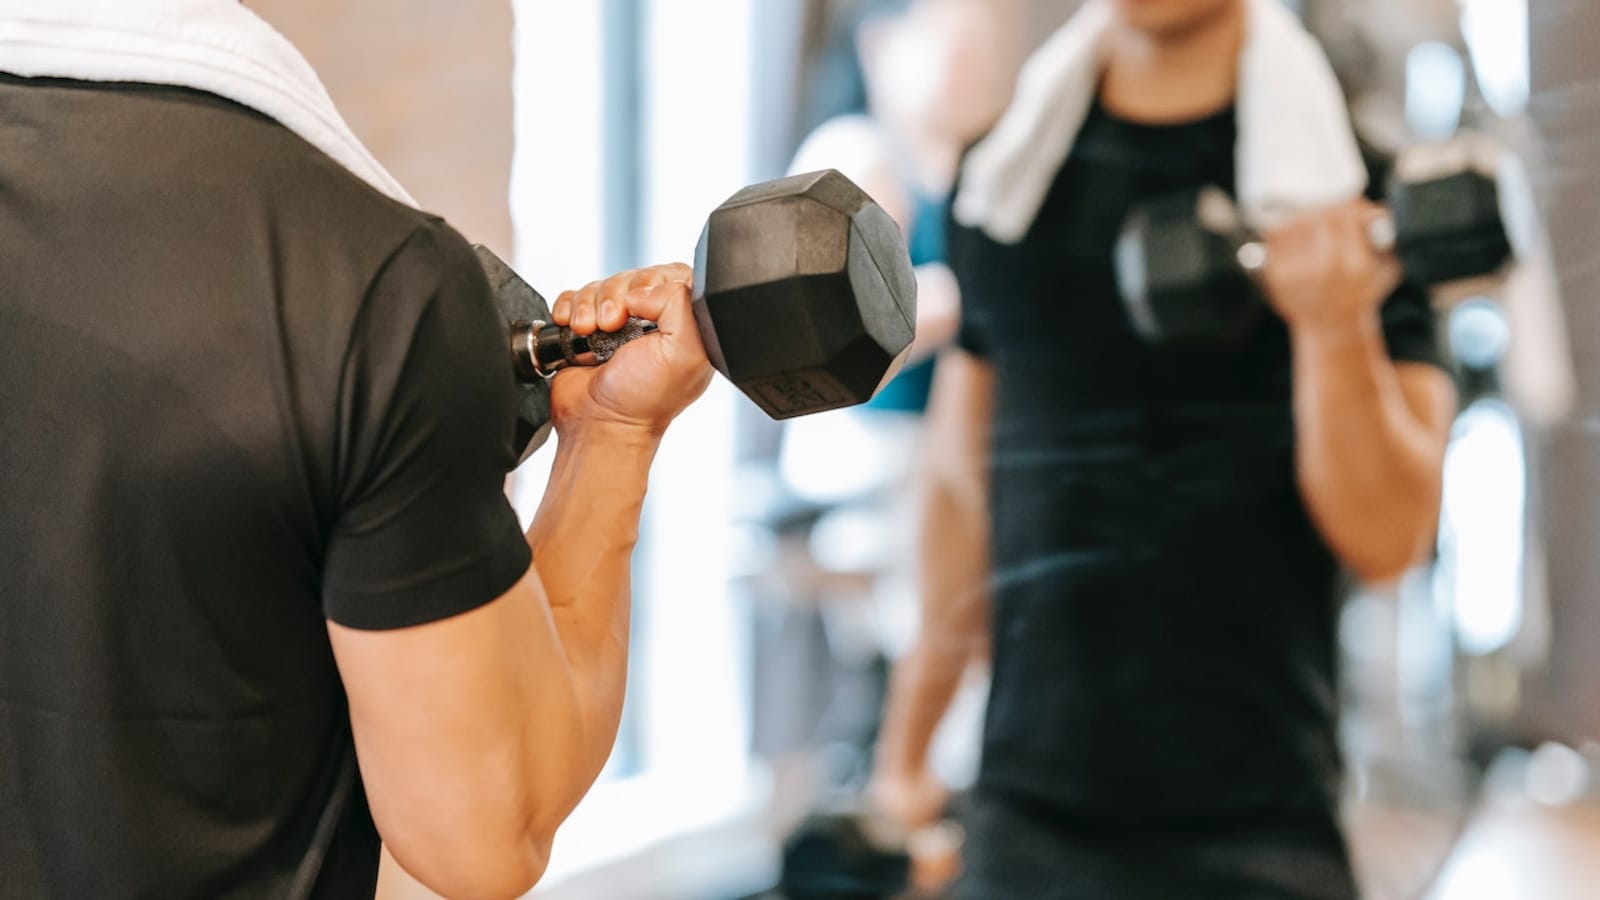 Eccentric Training: What It Is, the Benefits and How to Do It